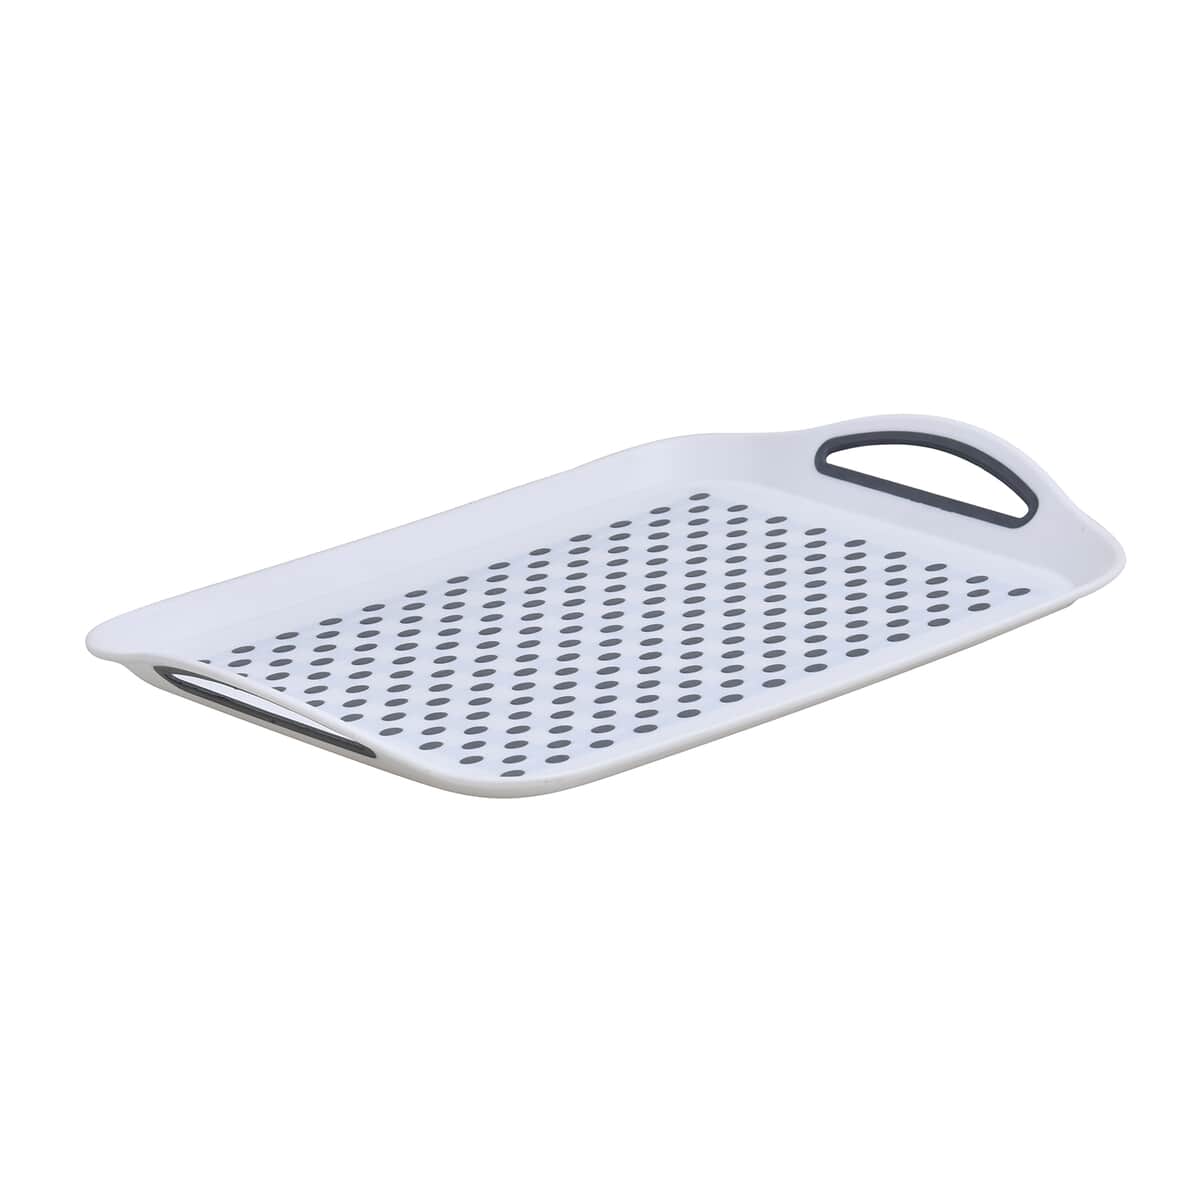 White Rectangle Non-Skid Rubber Grip Serving Tray with Handles, Large Serving Tray image number 0